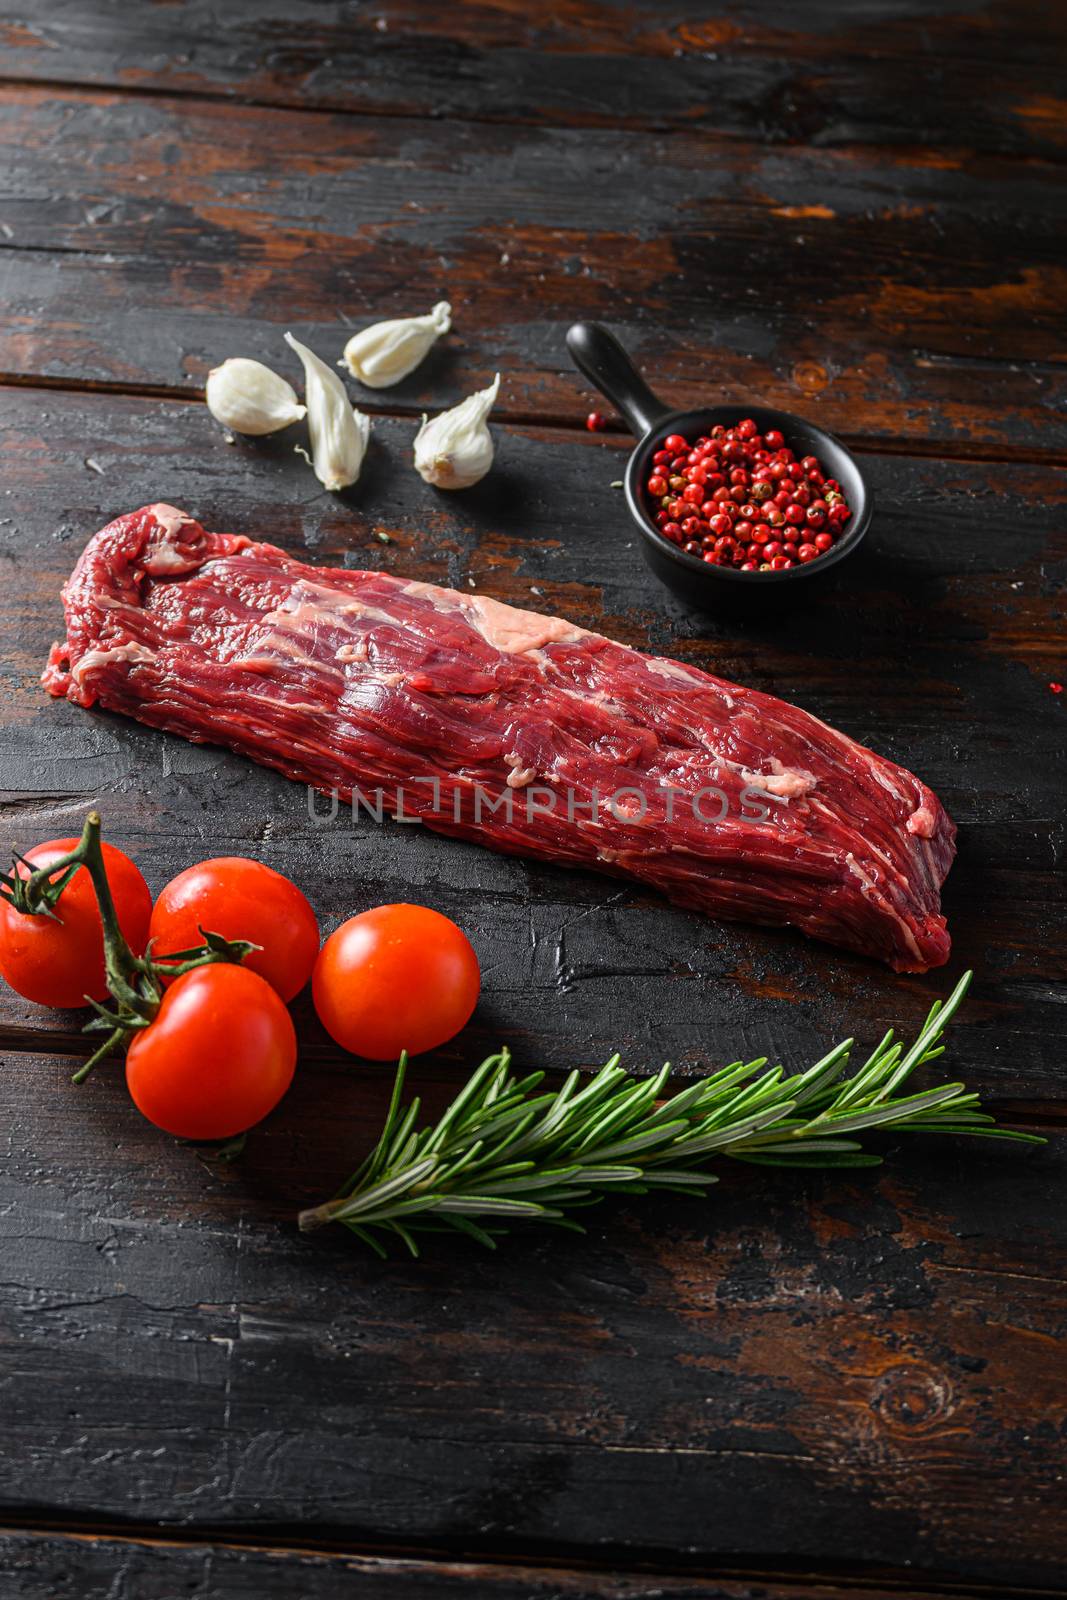 Machete steak raw cut or hanging tende cut, with rosemary over wood background Top side view by Ilianesolenyi